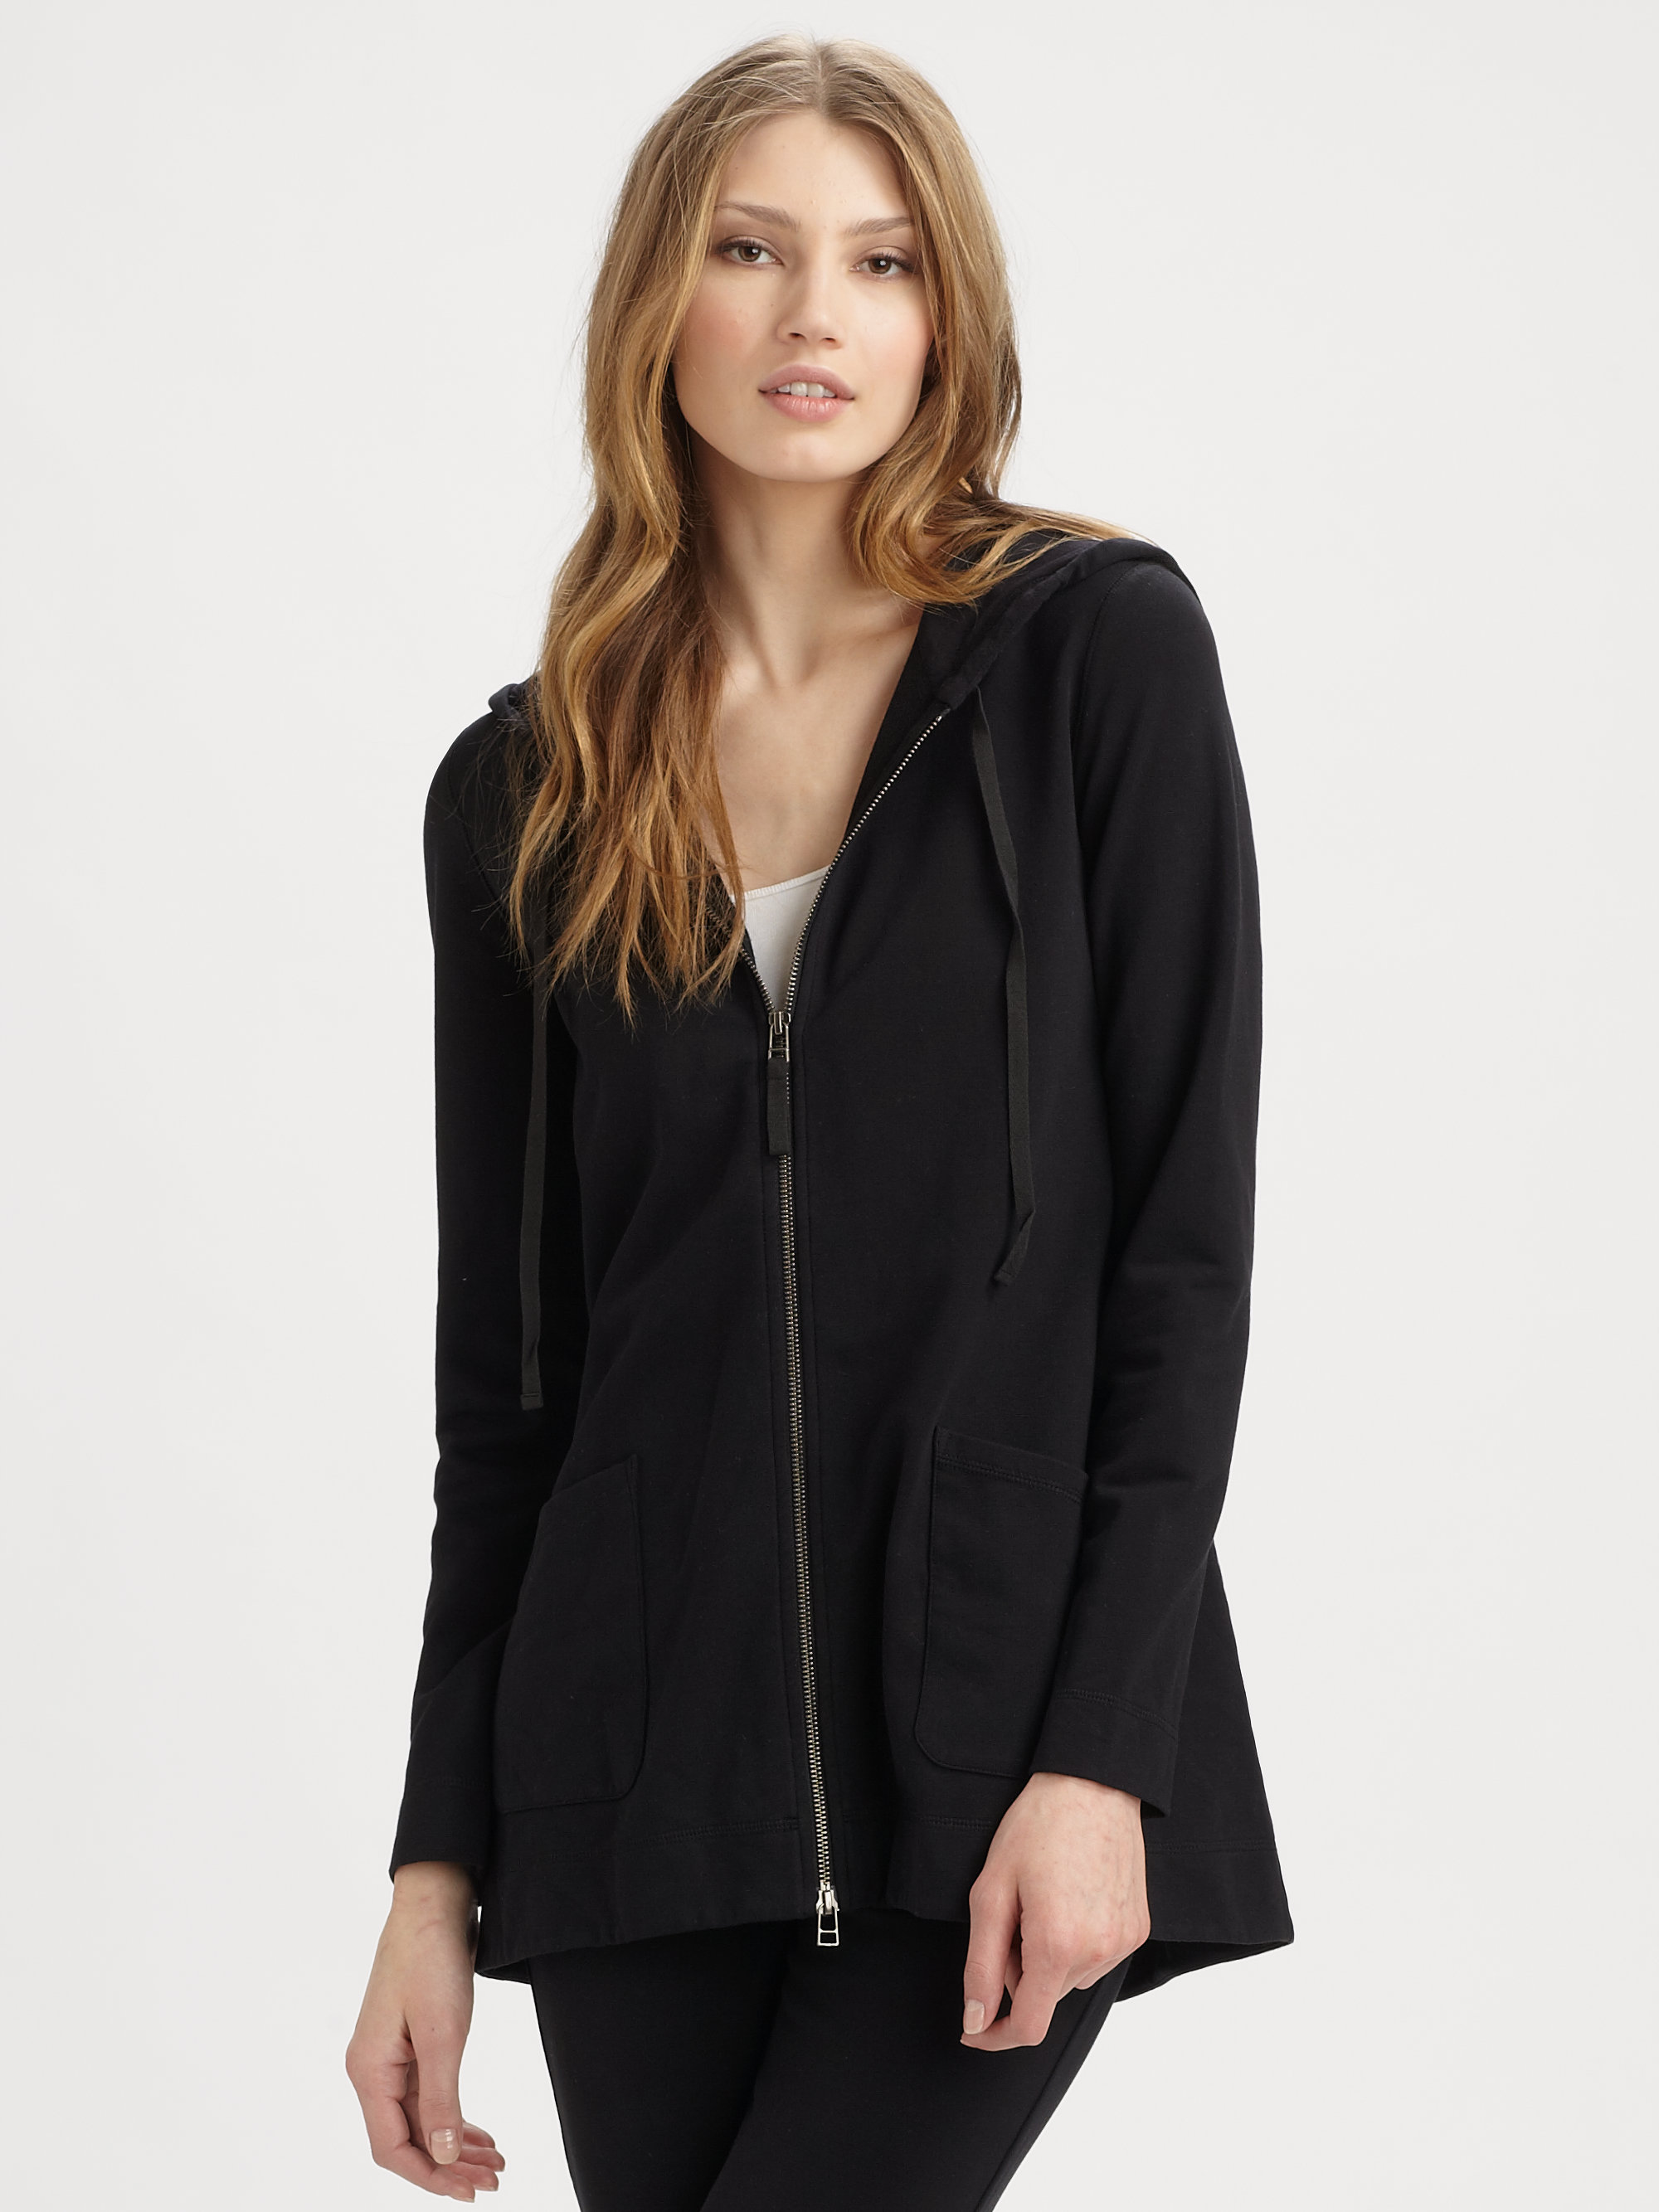 Eileen fisher Stretch Terry Hooded Jacket in Black Lyst